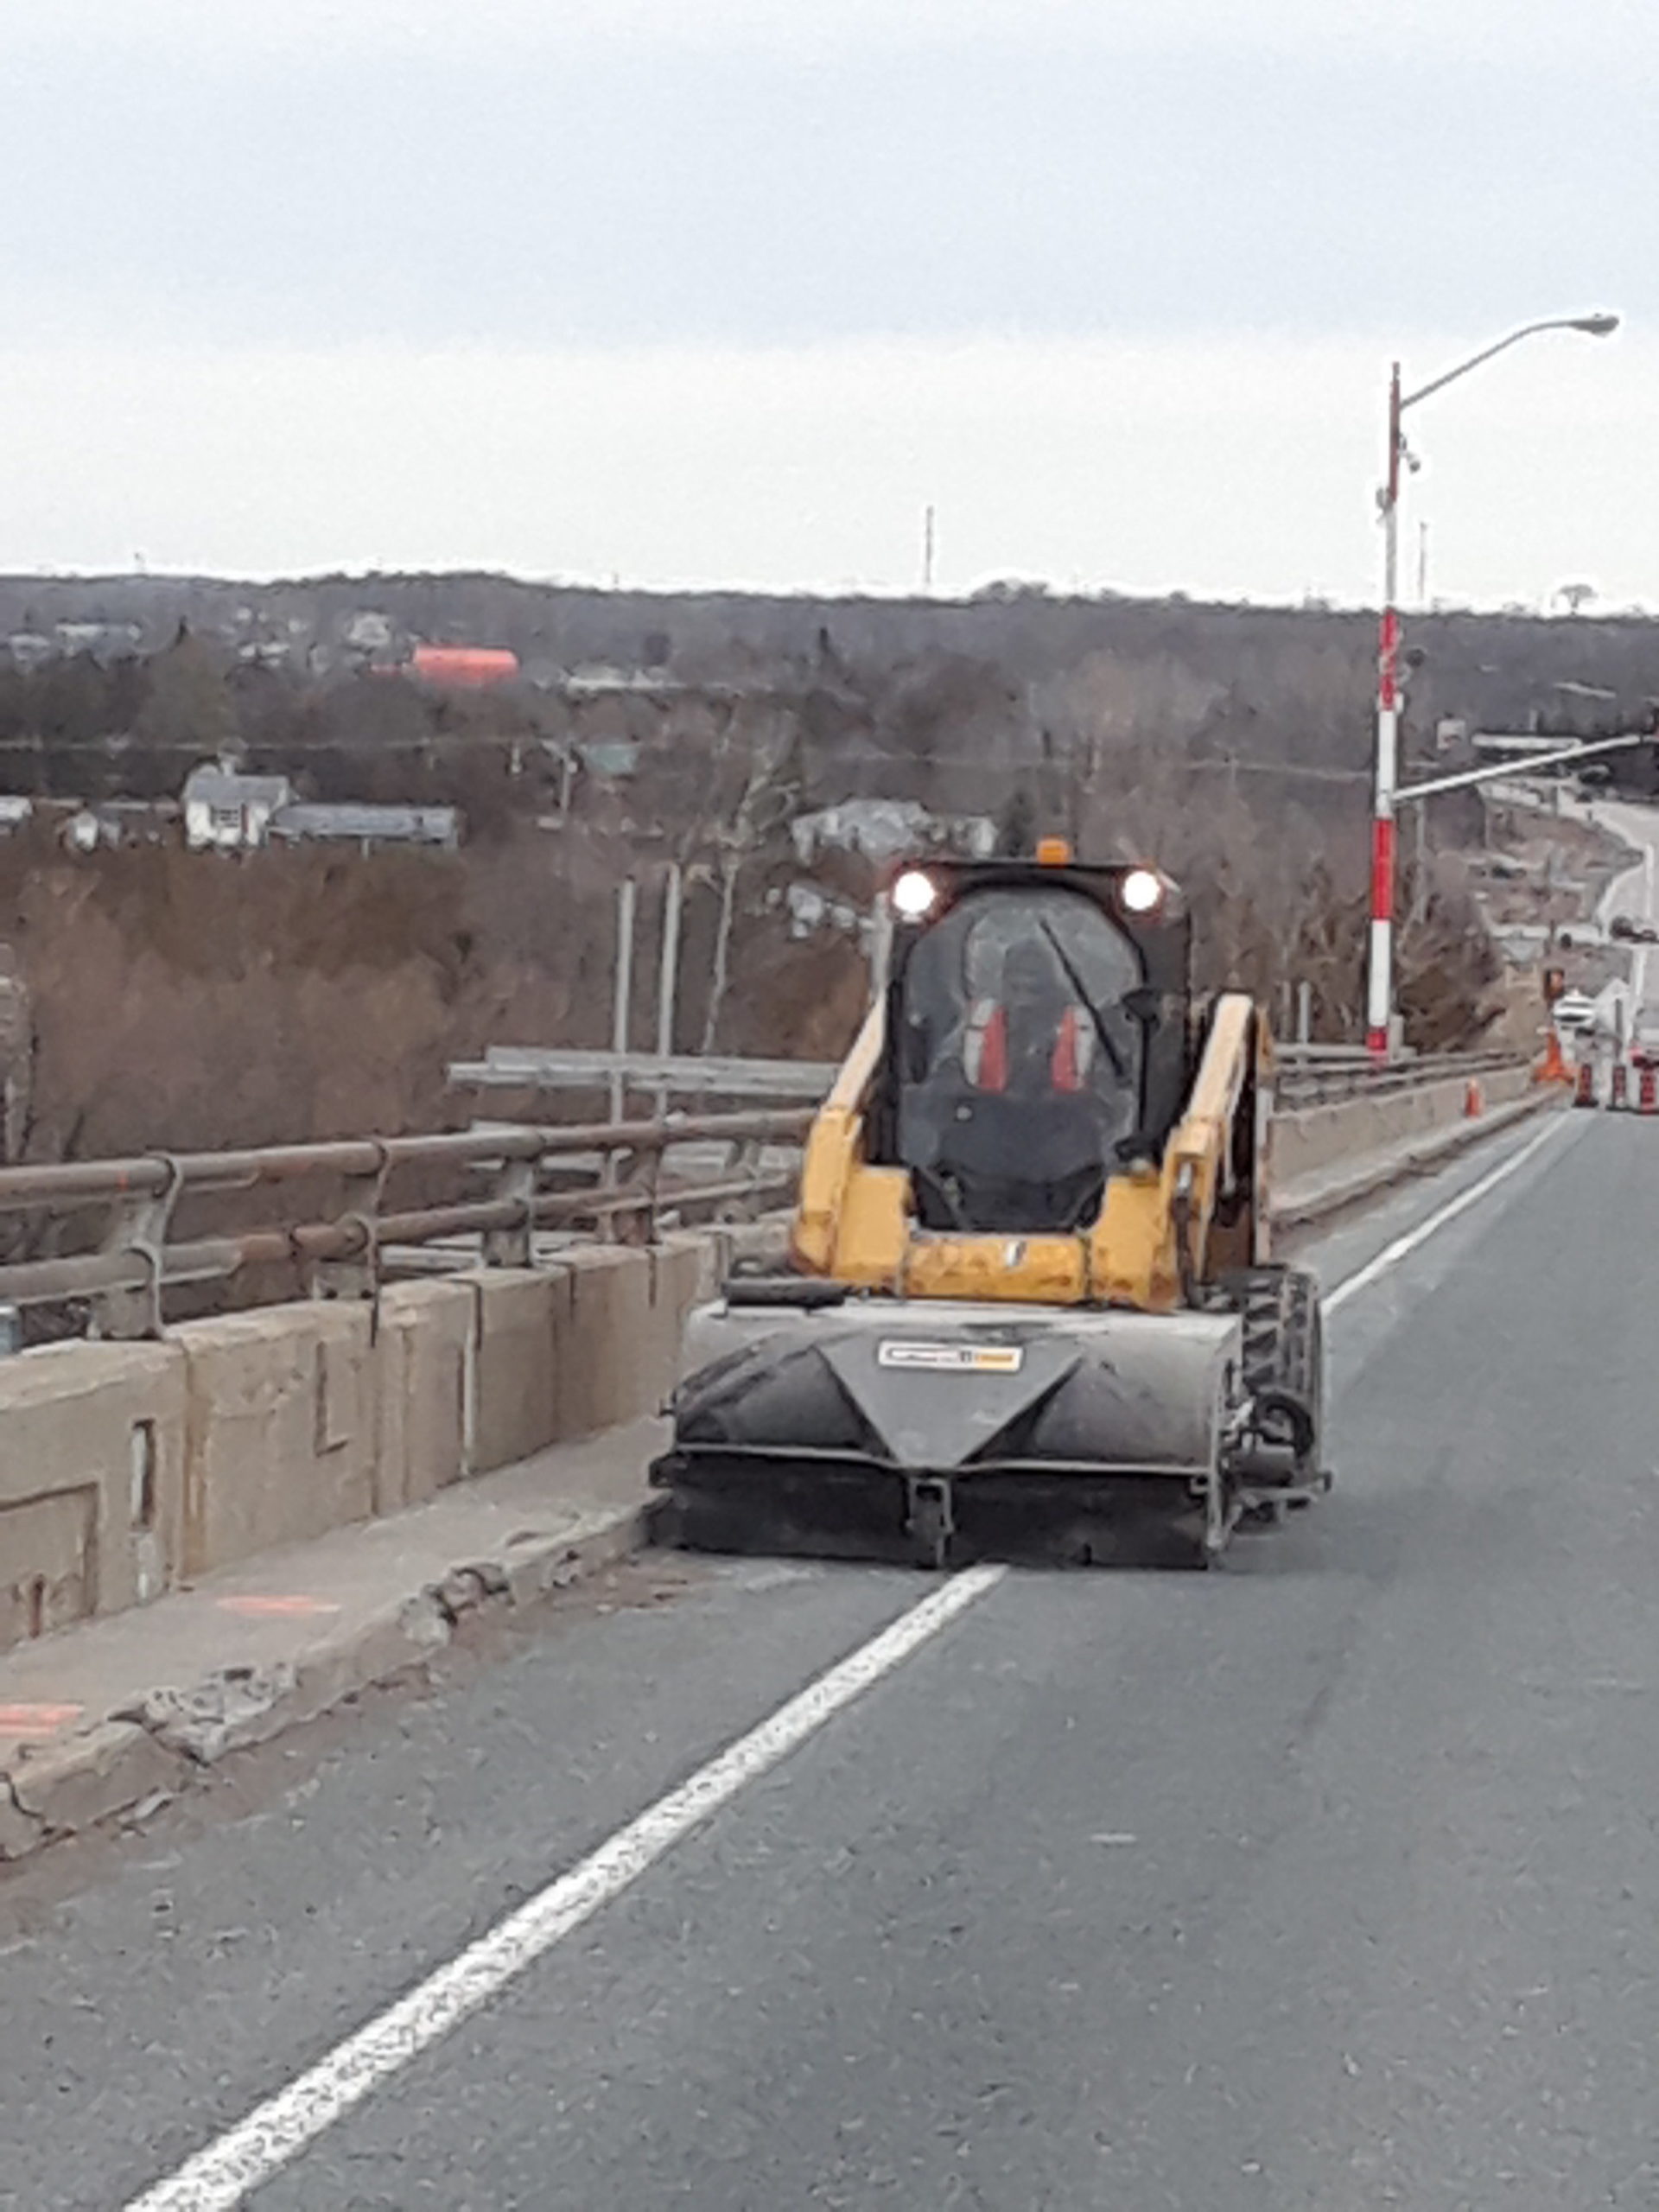 Skid steer with sweeper cleaning the bridge before line painting